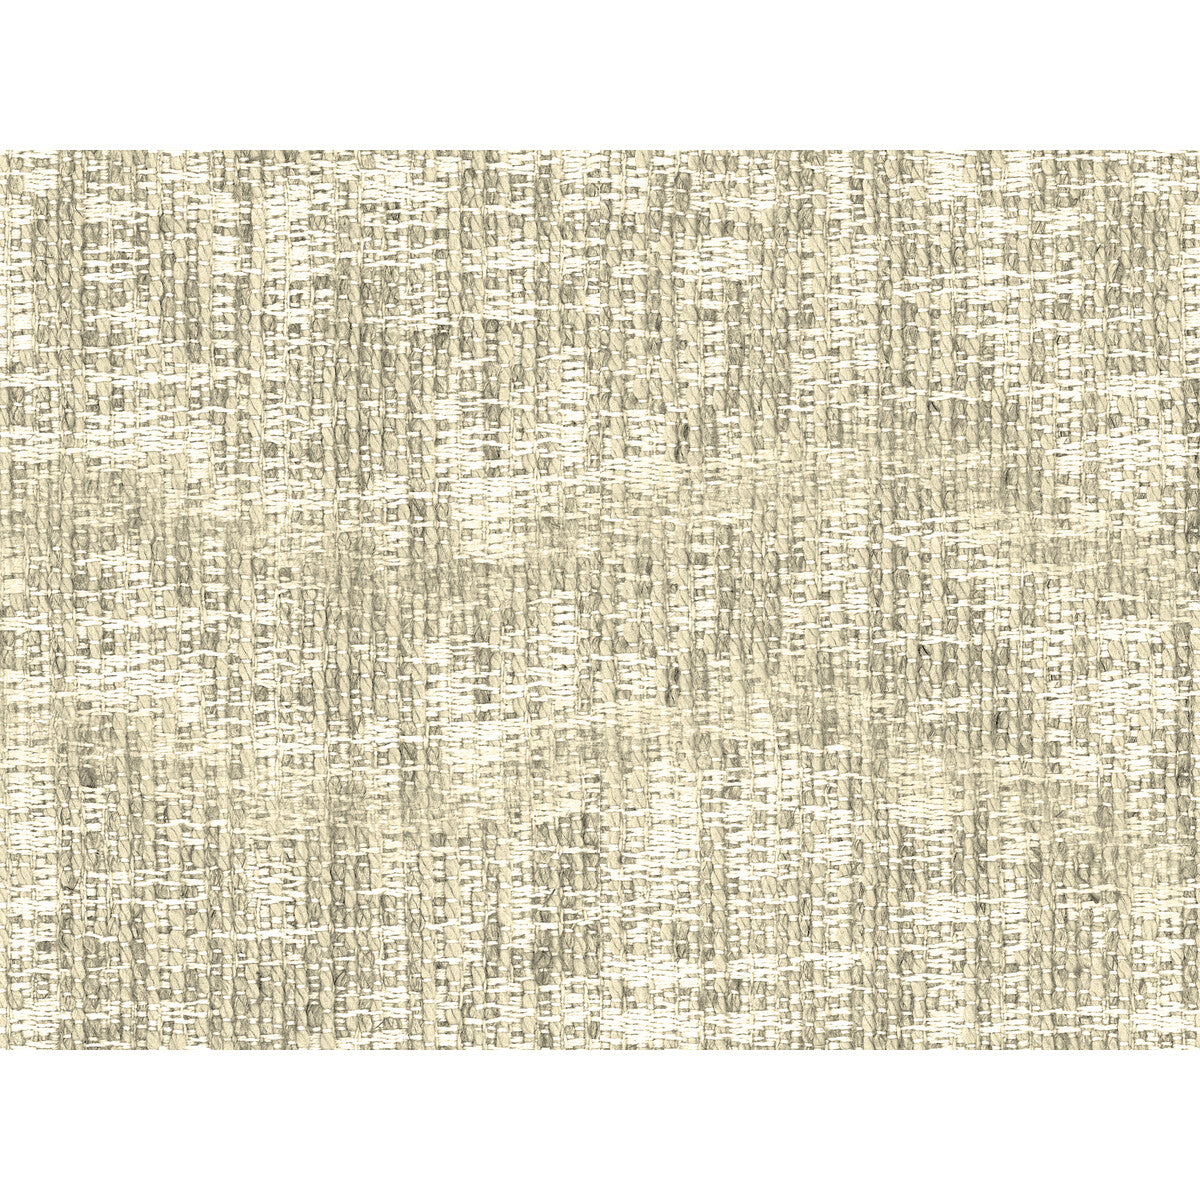 Kravet Couture fabric in 34831-16 color - pattern 34831.16.0 - by Kravet Couture in the Mabley Handler collection